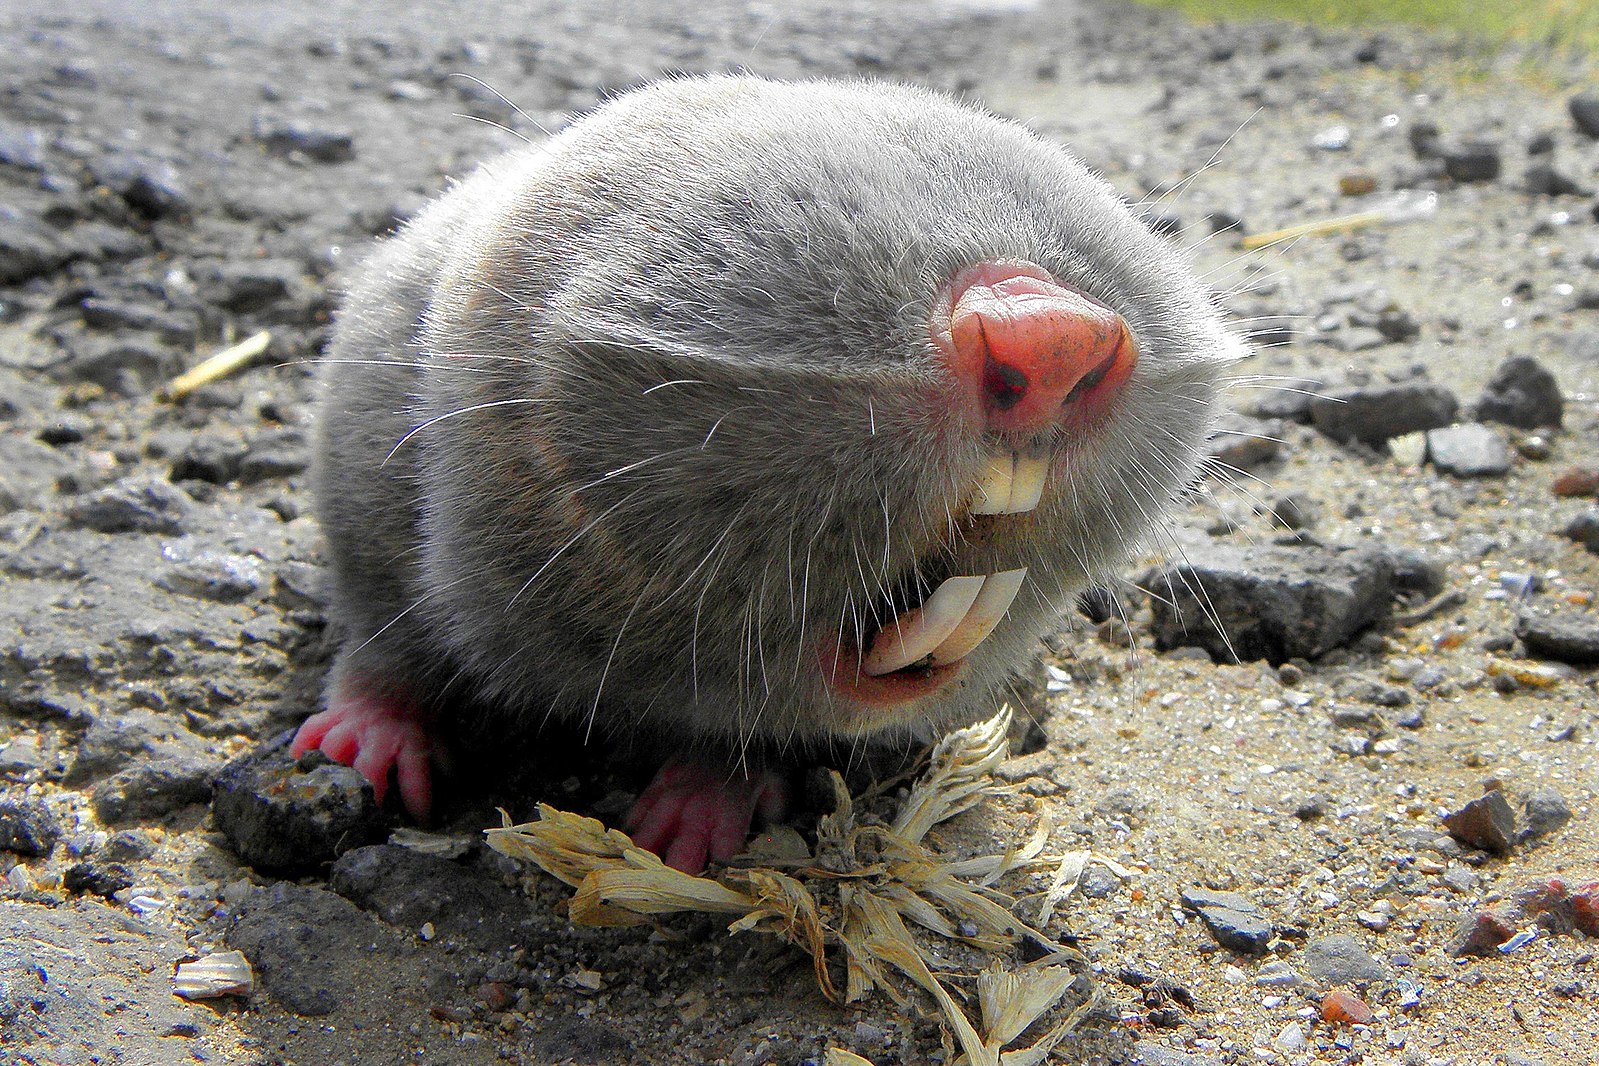 A sandy blind mole rat sitting on the ground with his large teeth showing.